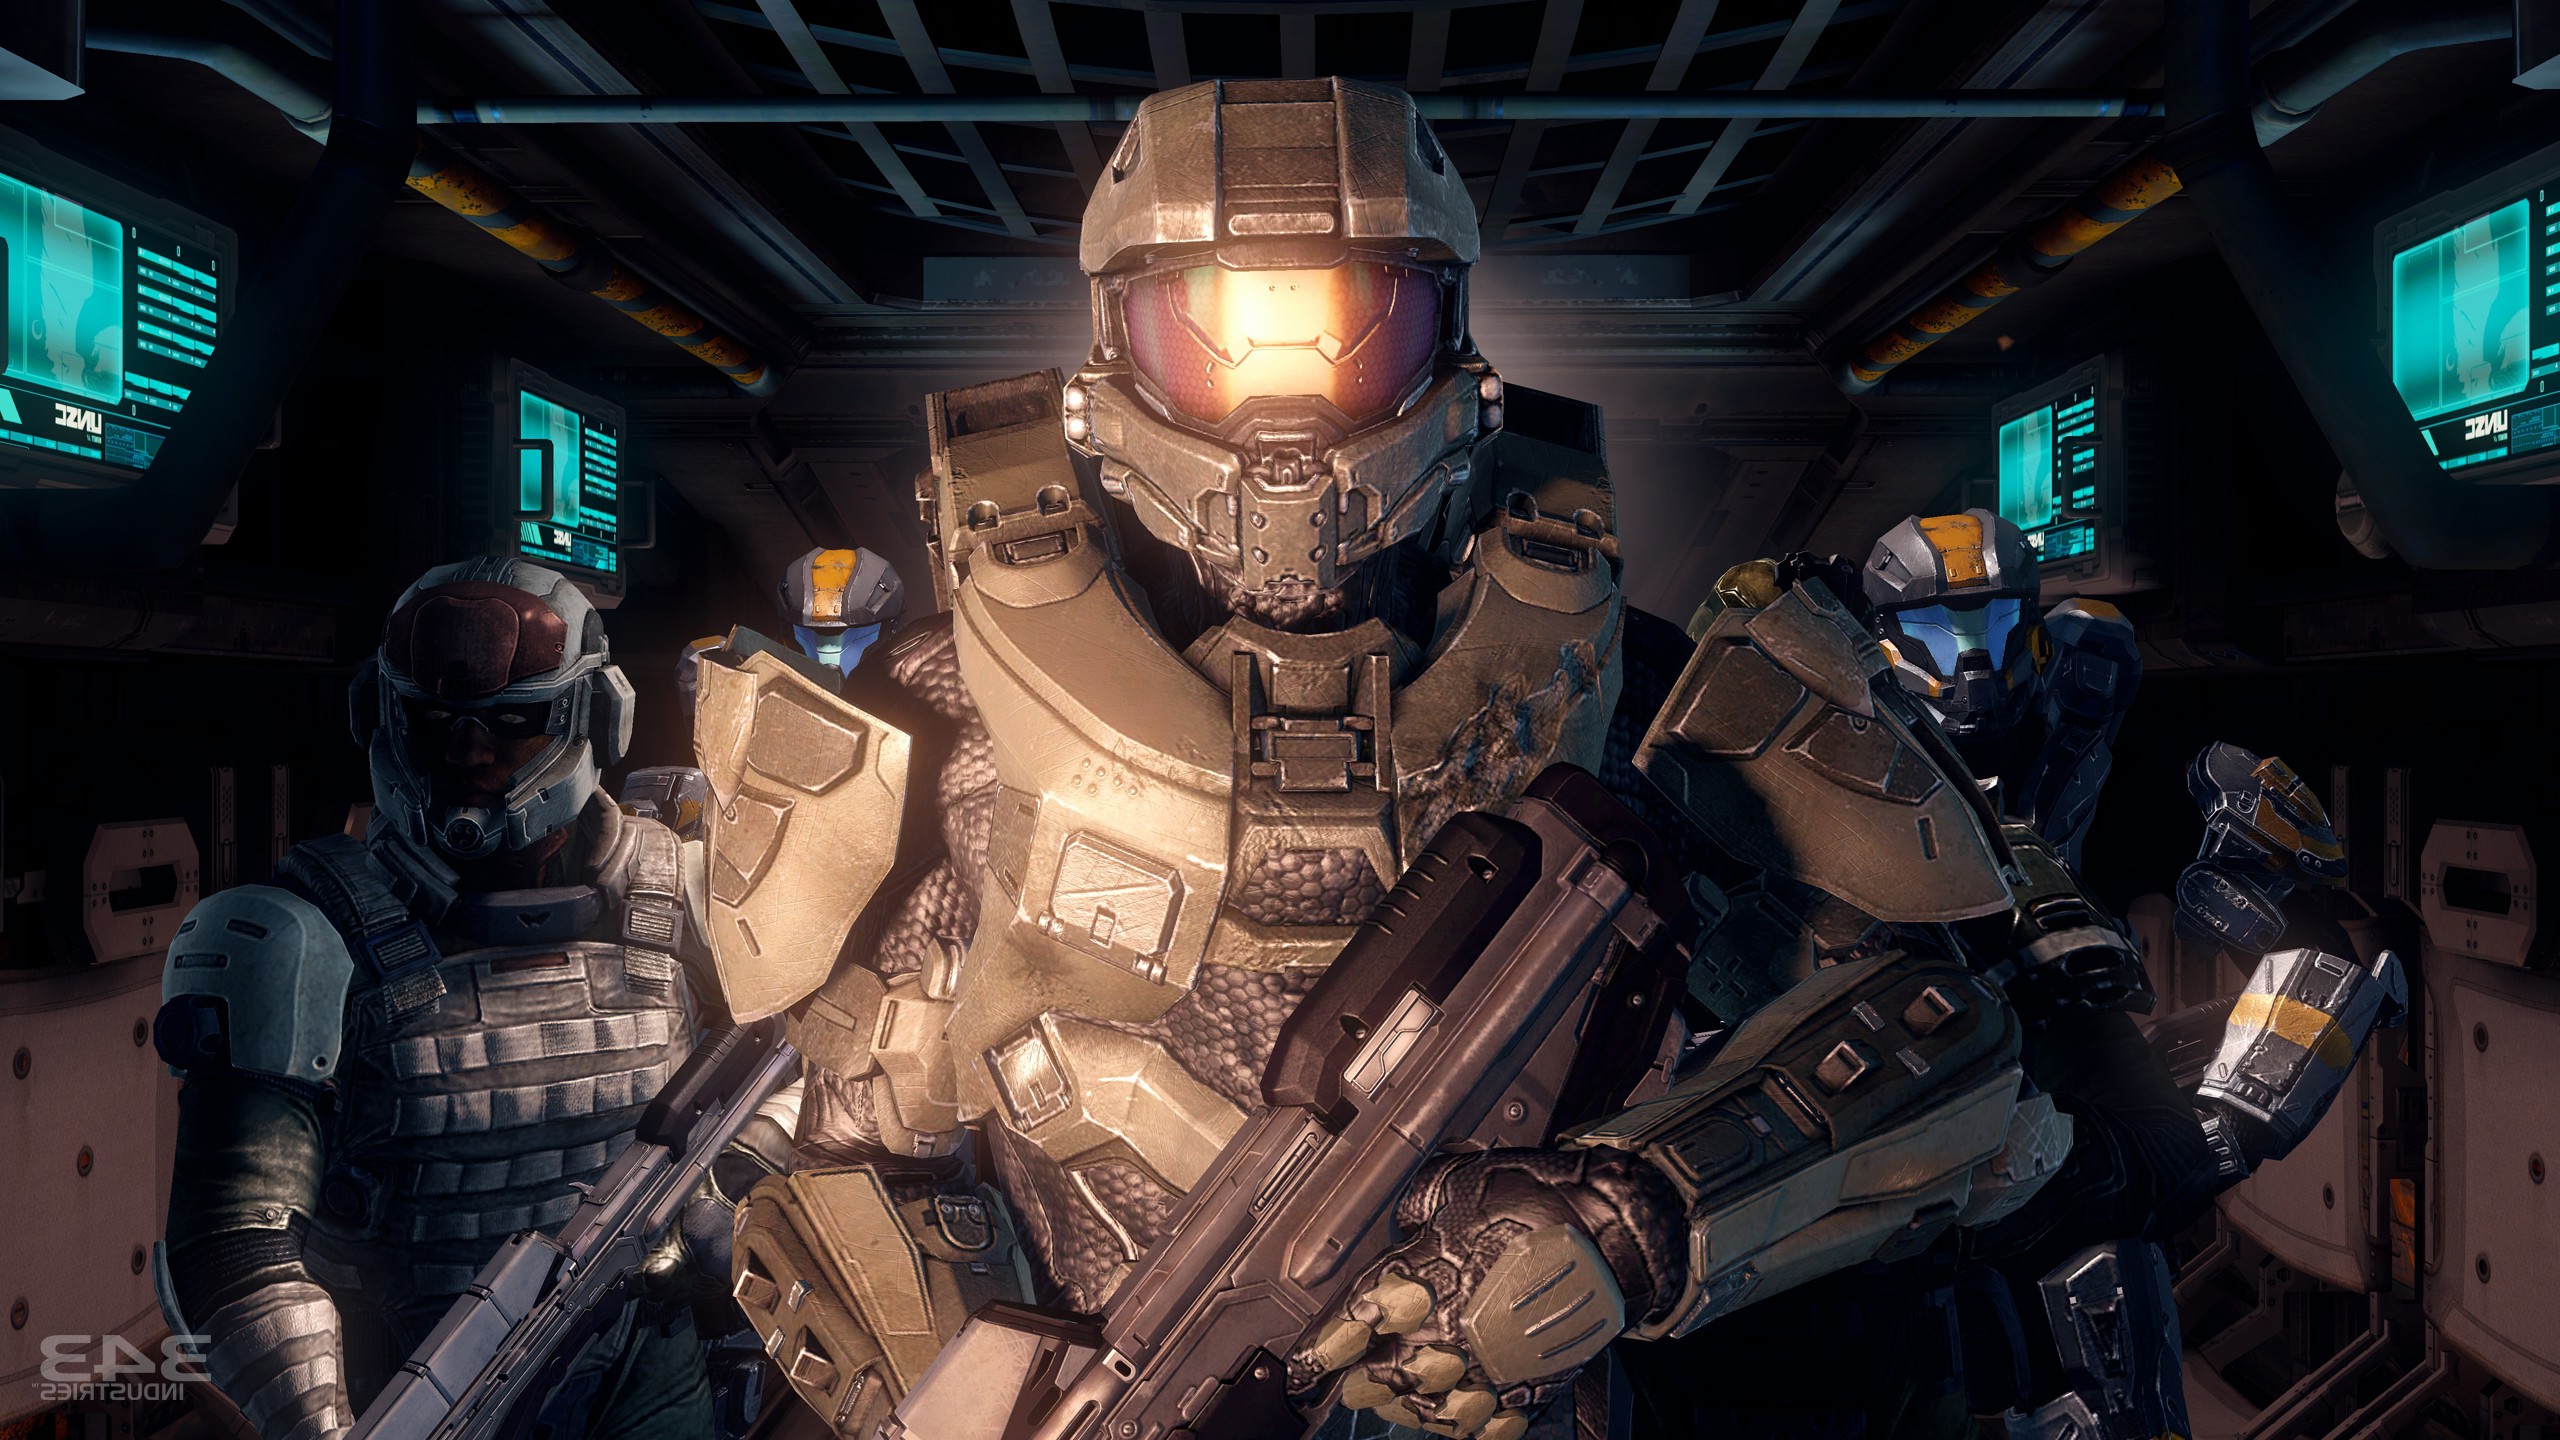 Halo, Master Chief, Halo 4, 343 Industries, Halo: Master Chief Collection, Xbox One, Video Games Wallpaper